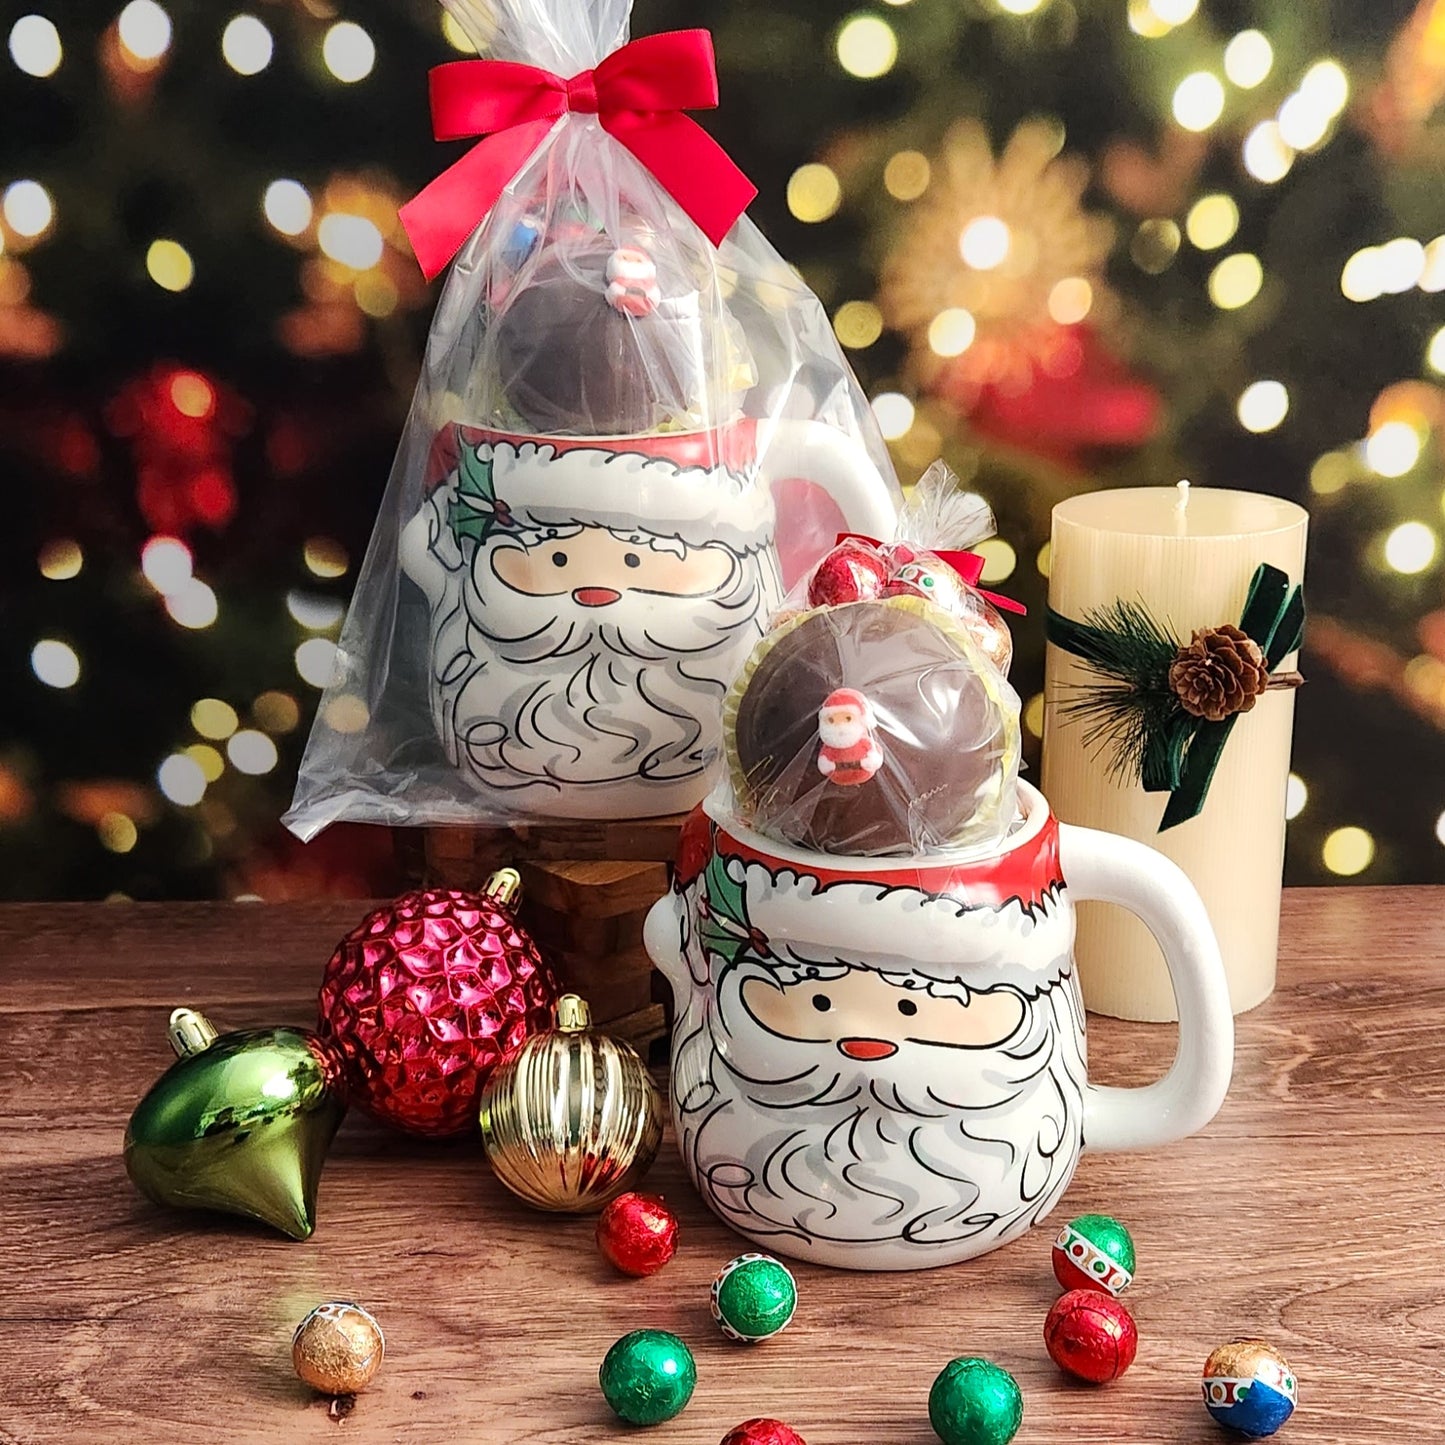 Spread season’s greetings with this cheerful ceramic Santa Face Gift mug, including a Milk Chocolate Hot Cocoa Bomb and Foiled Ornaments